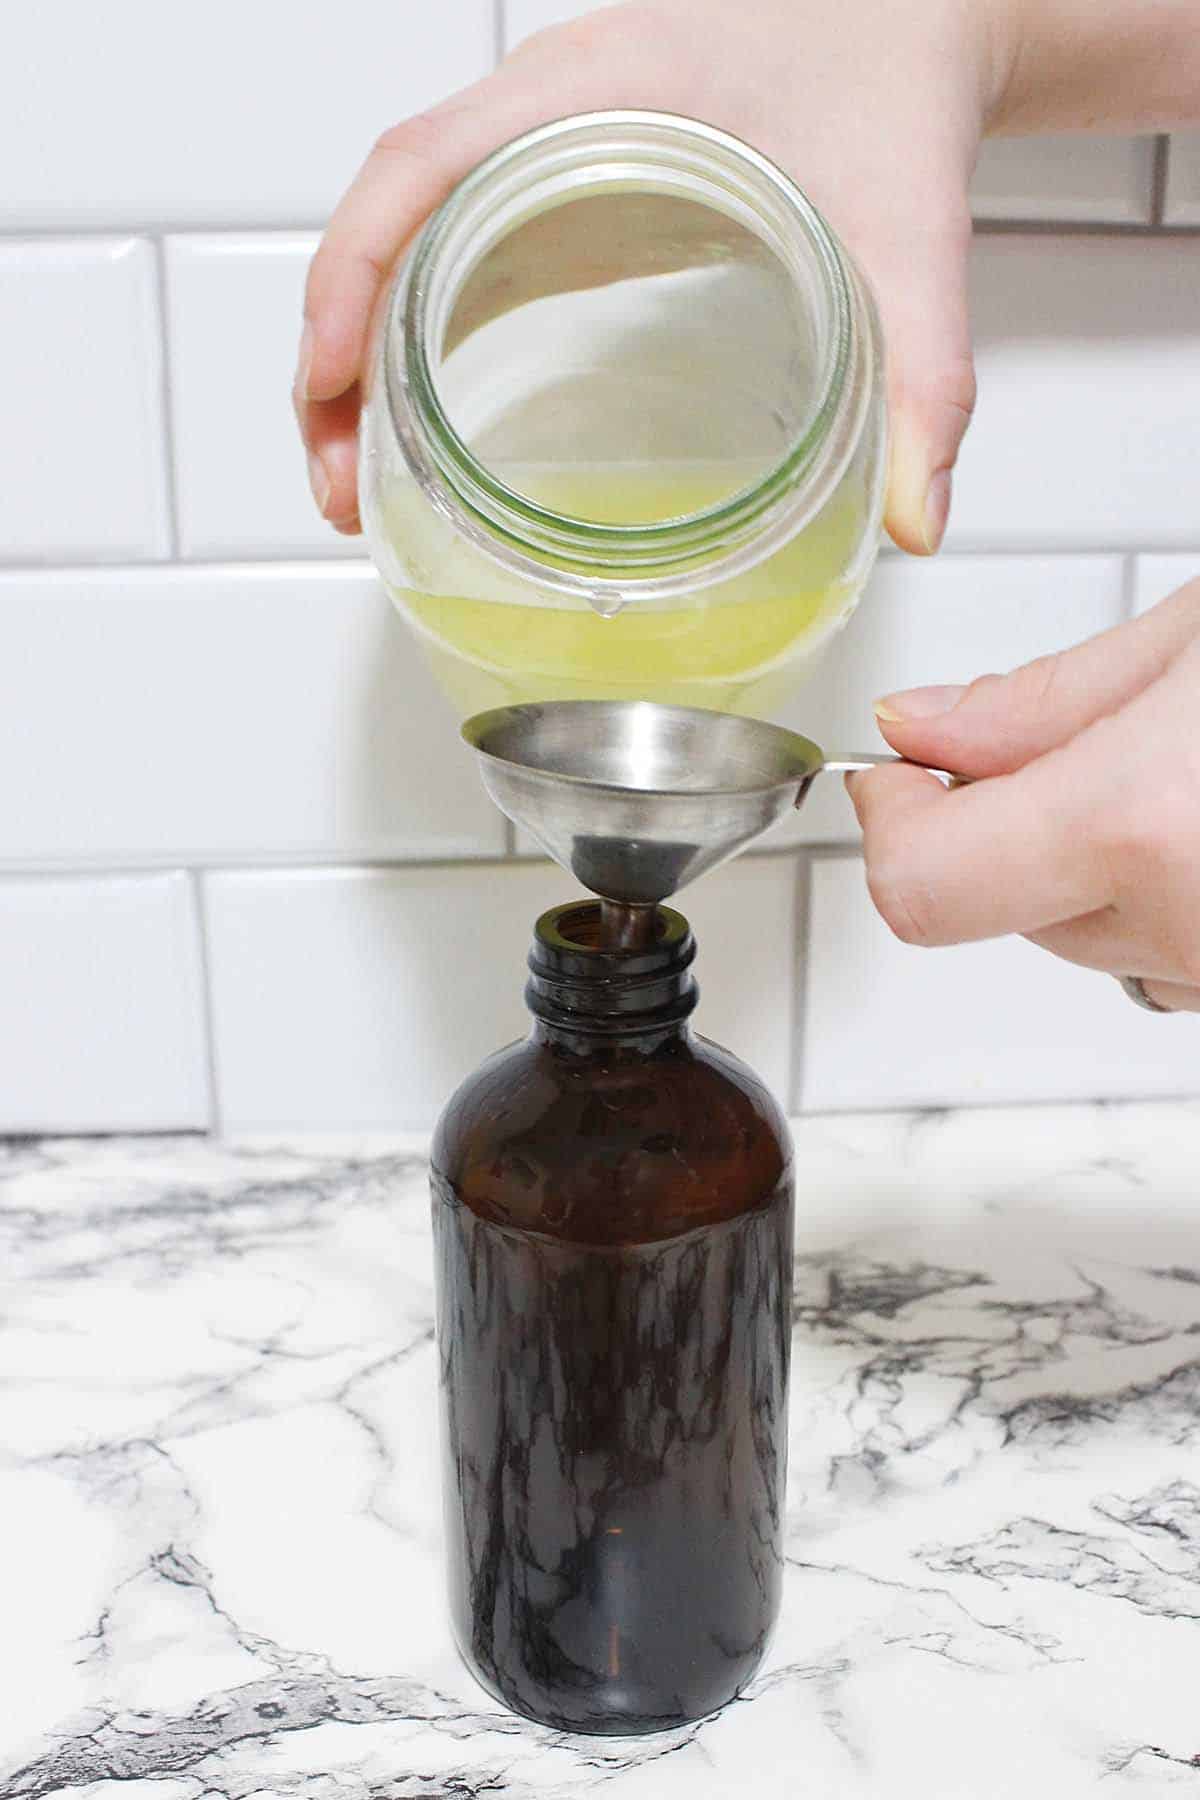 Pouring homemade orange lemon cleaner into a spray bottle with a funnel.